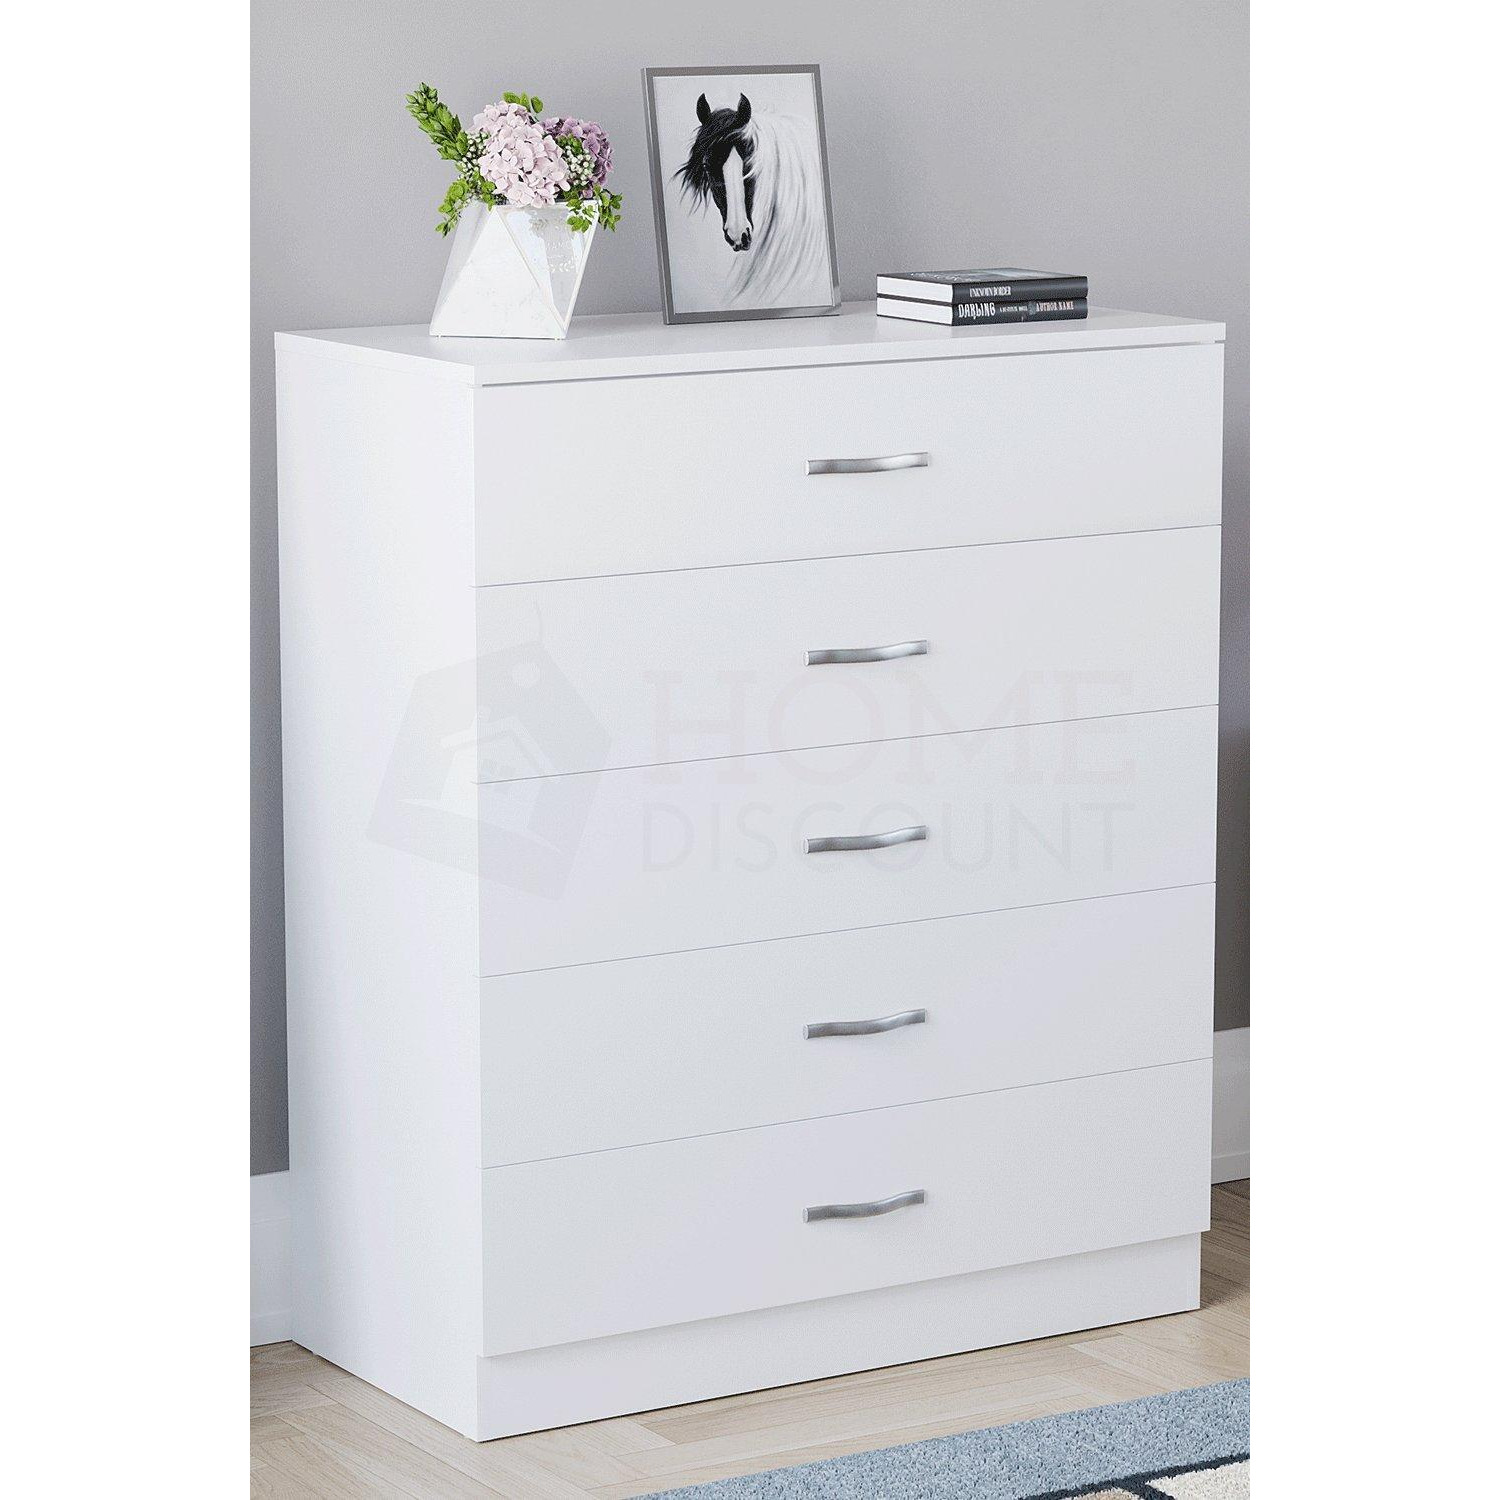 Vida Designs Riano 5 Drawer Chest of Drawers Storage Bedroom Furniture - image 1